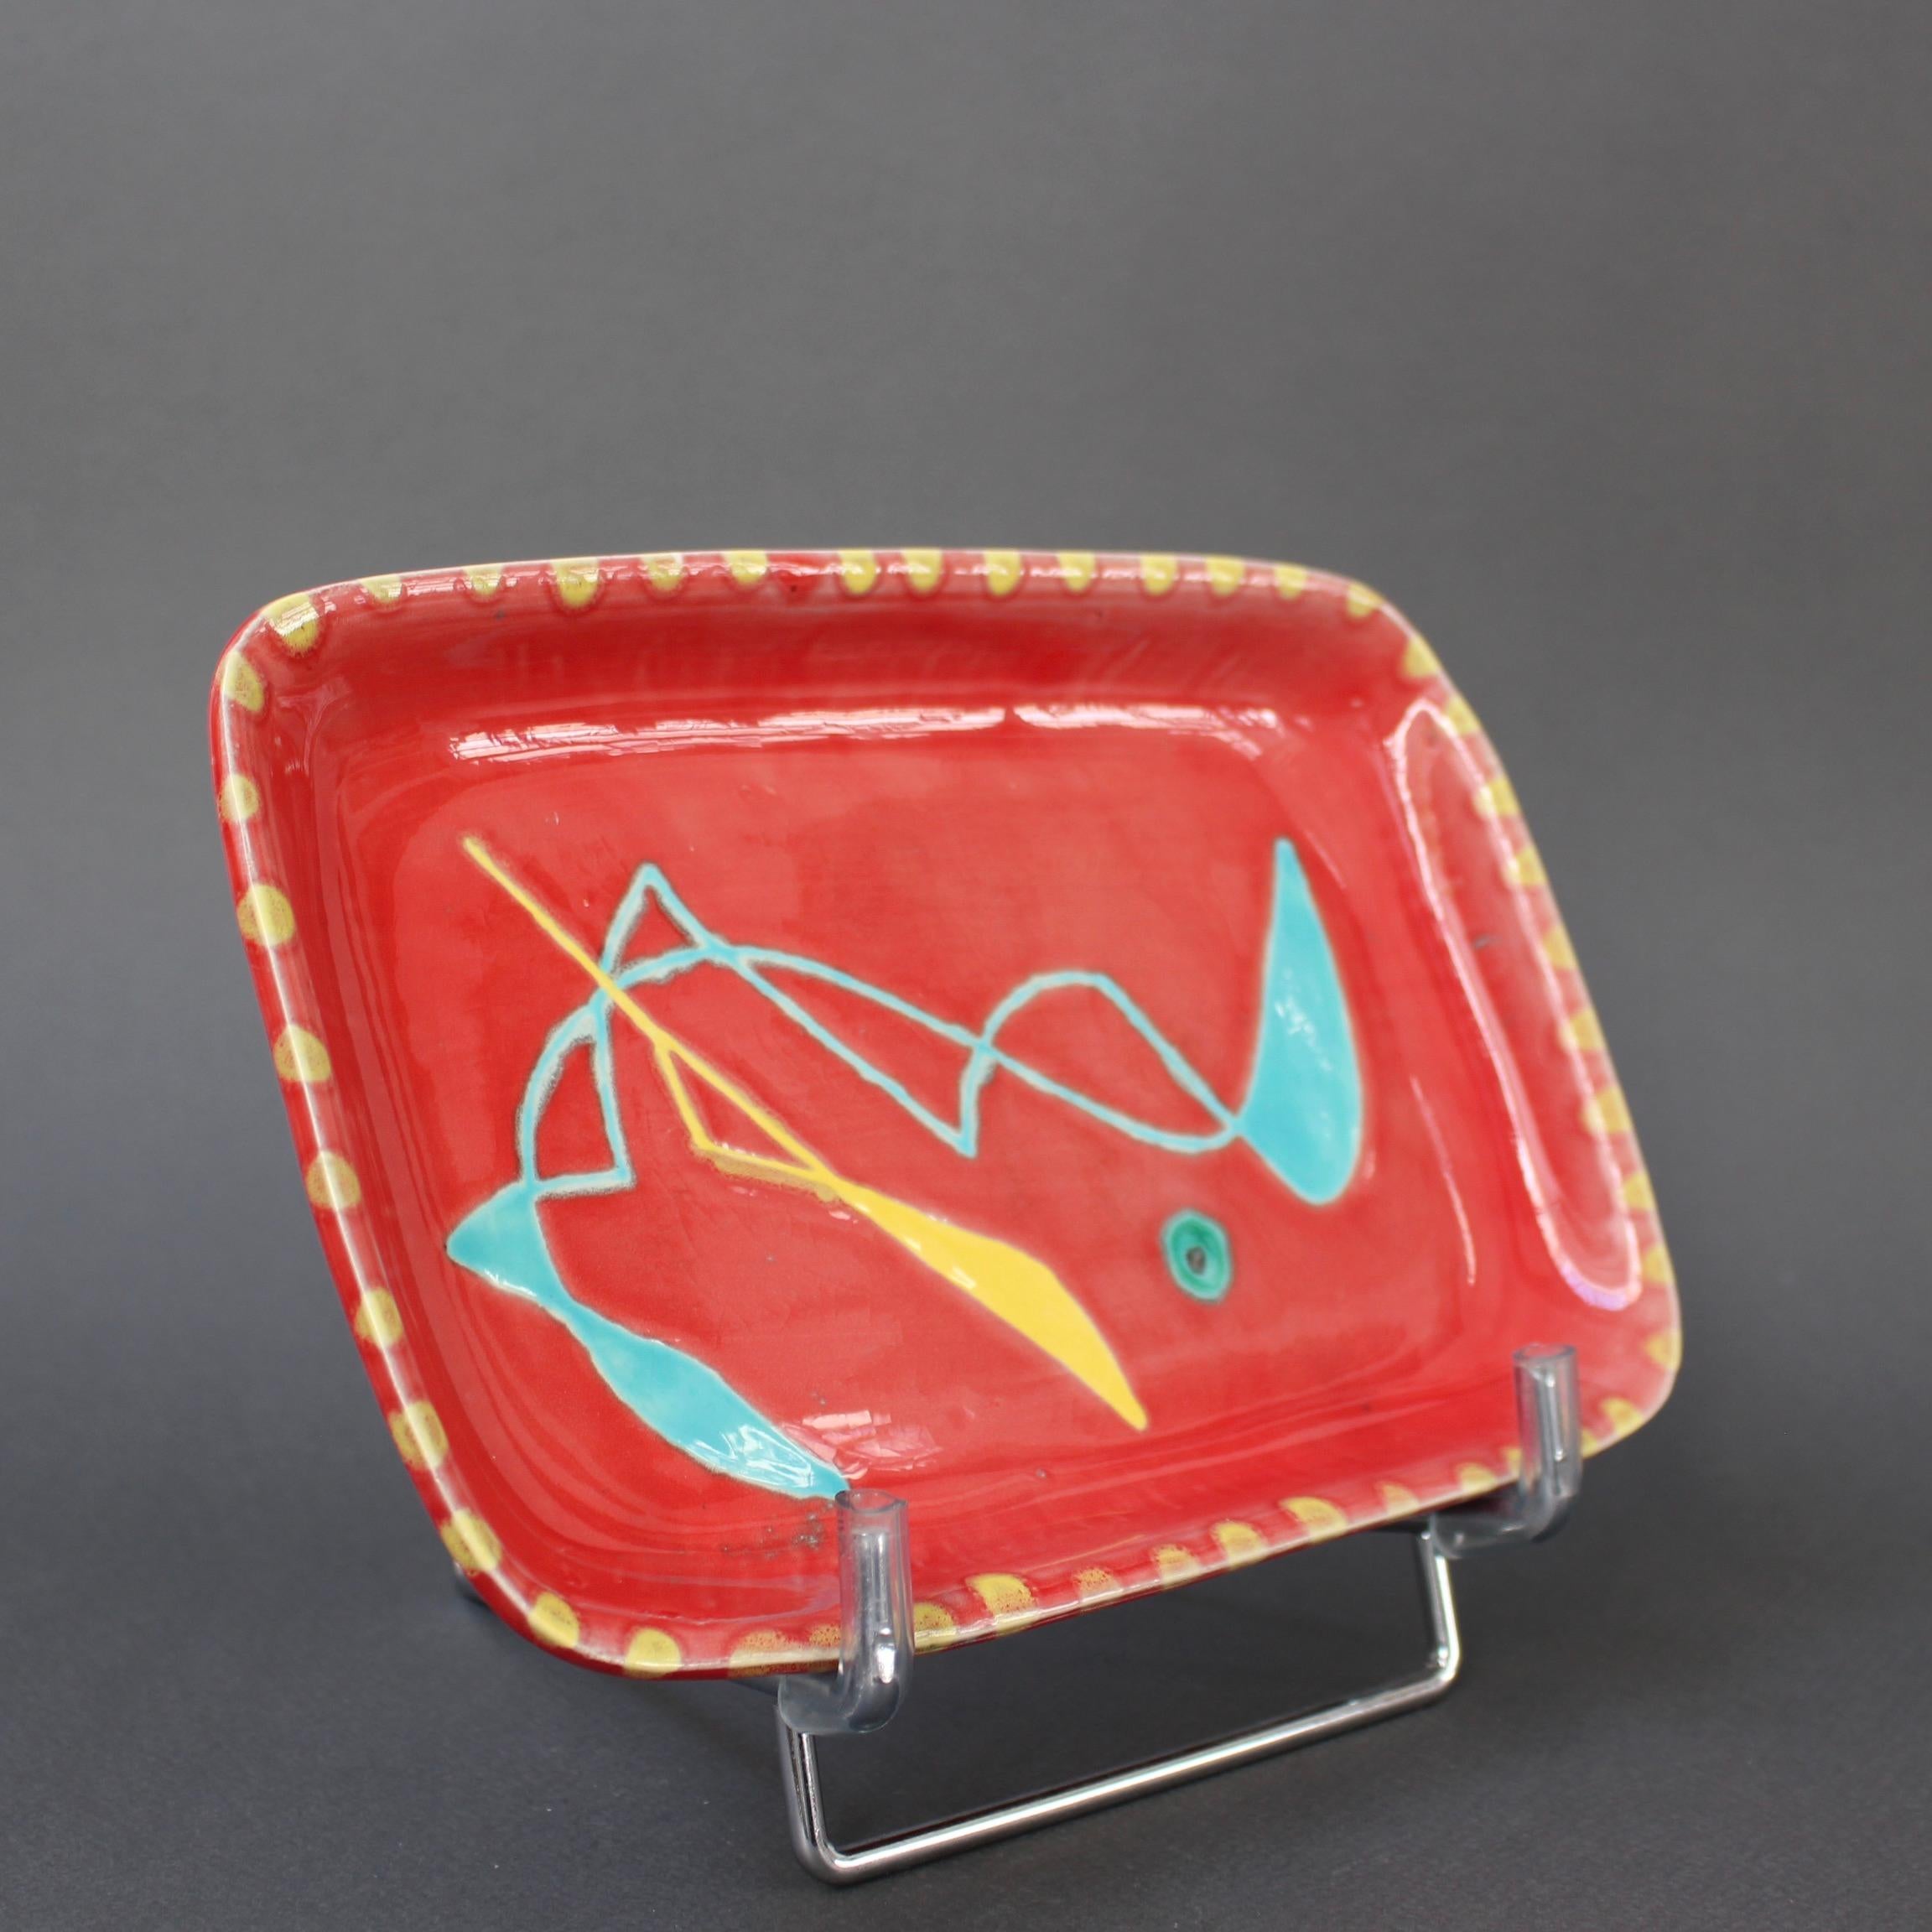 Mid-century ceramic hors d'oeuvres tray by Charles René Neveux for Cerenne Workshop (circa 1950s). This rare ceramic with abstract motif is signed by Neveux himself. A tomato-red base is complemented by a yellow repeating pattern at the edges and a